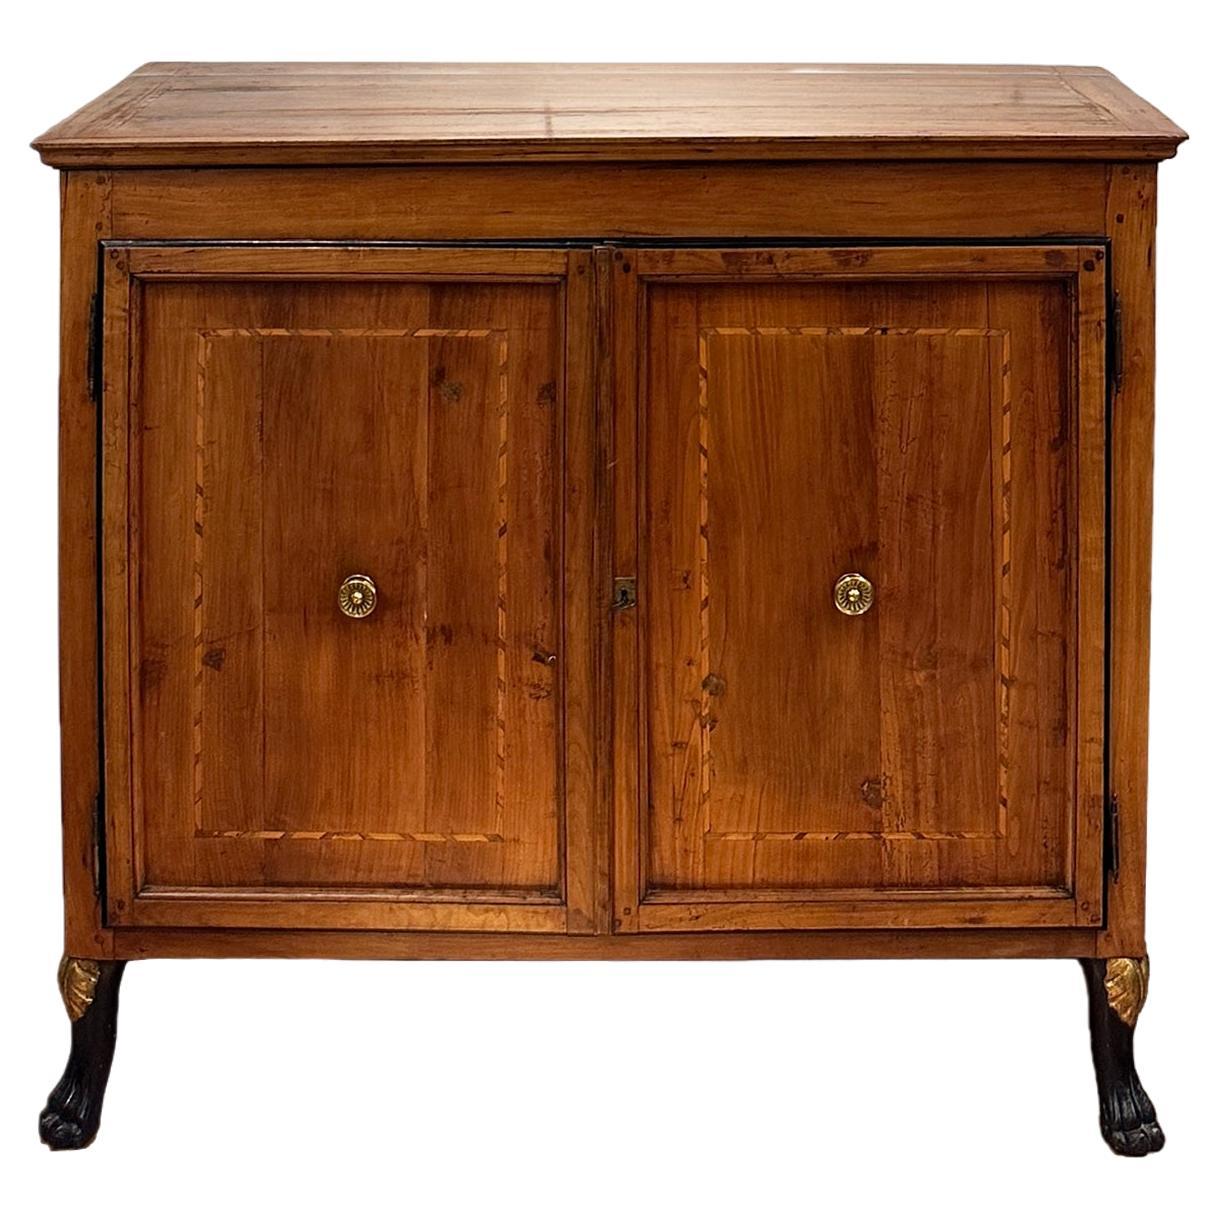 EARLY 19th CENTURY LUCHESE EMPIRE SIDEBOARD For Sale